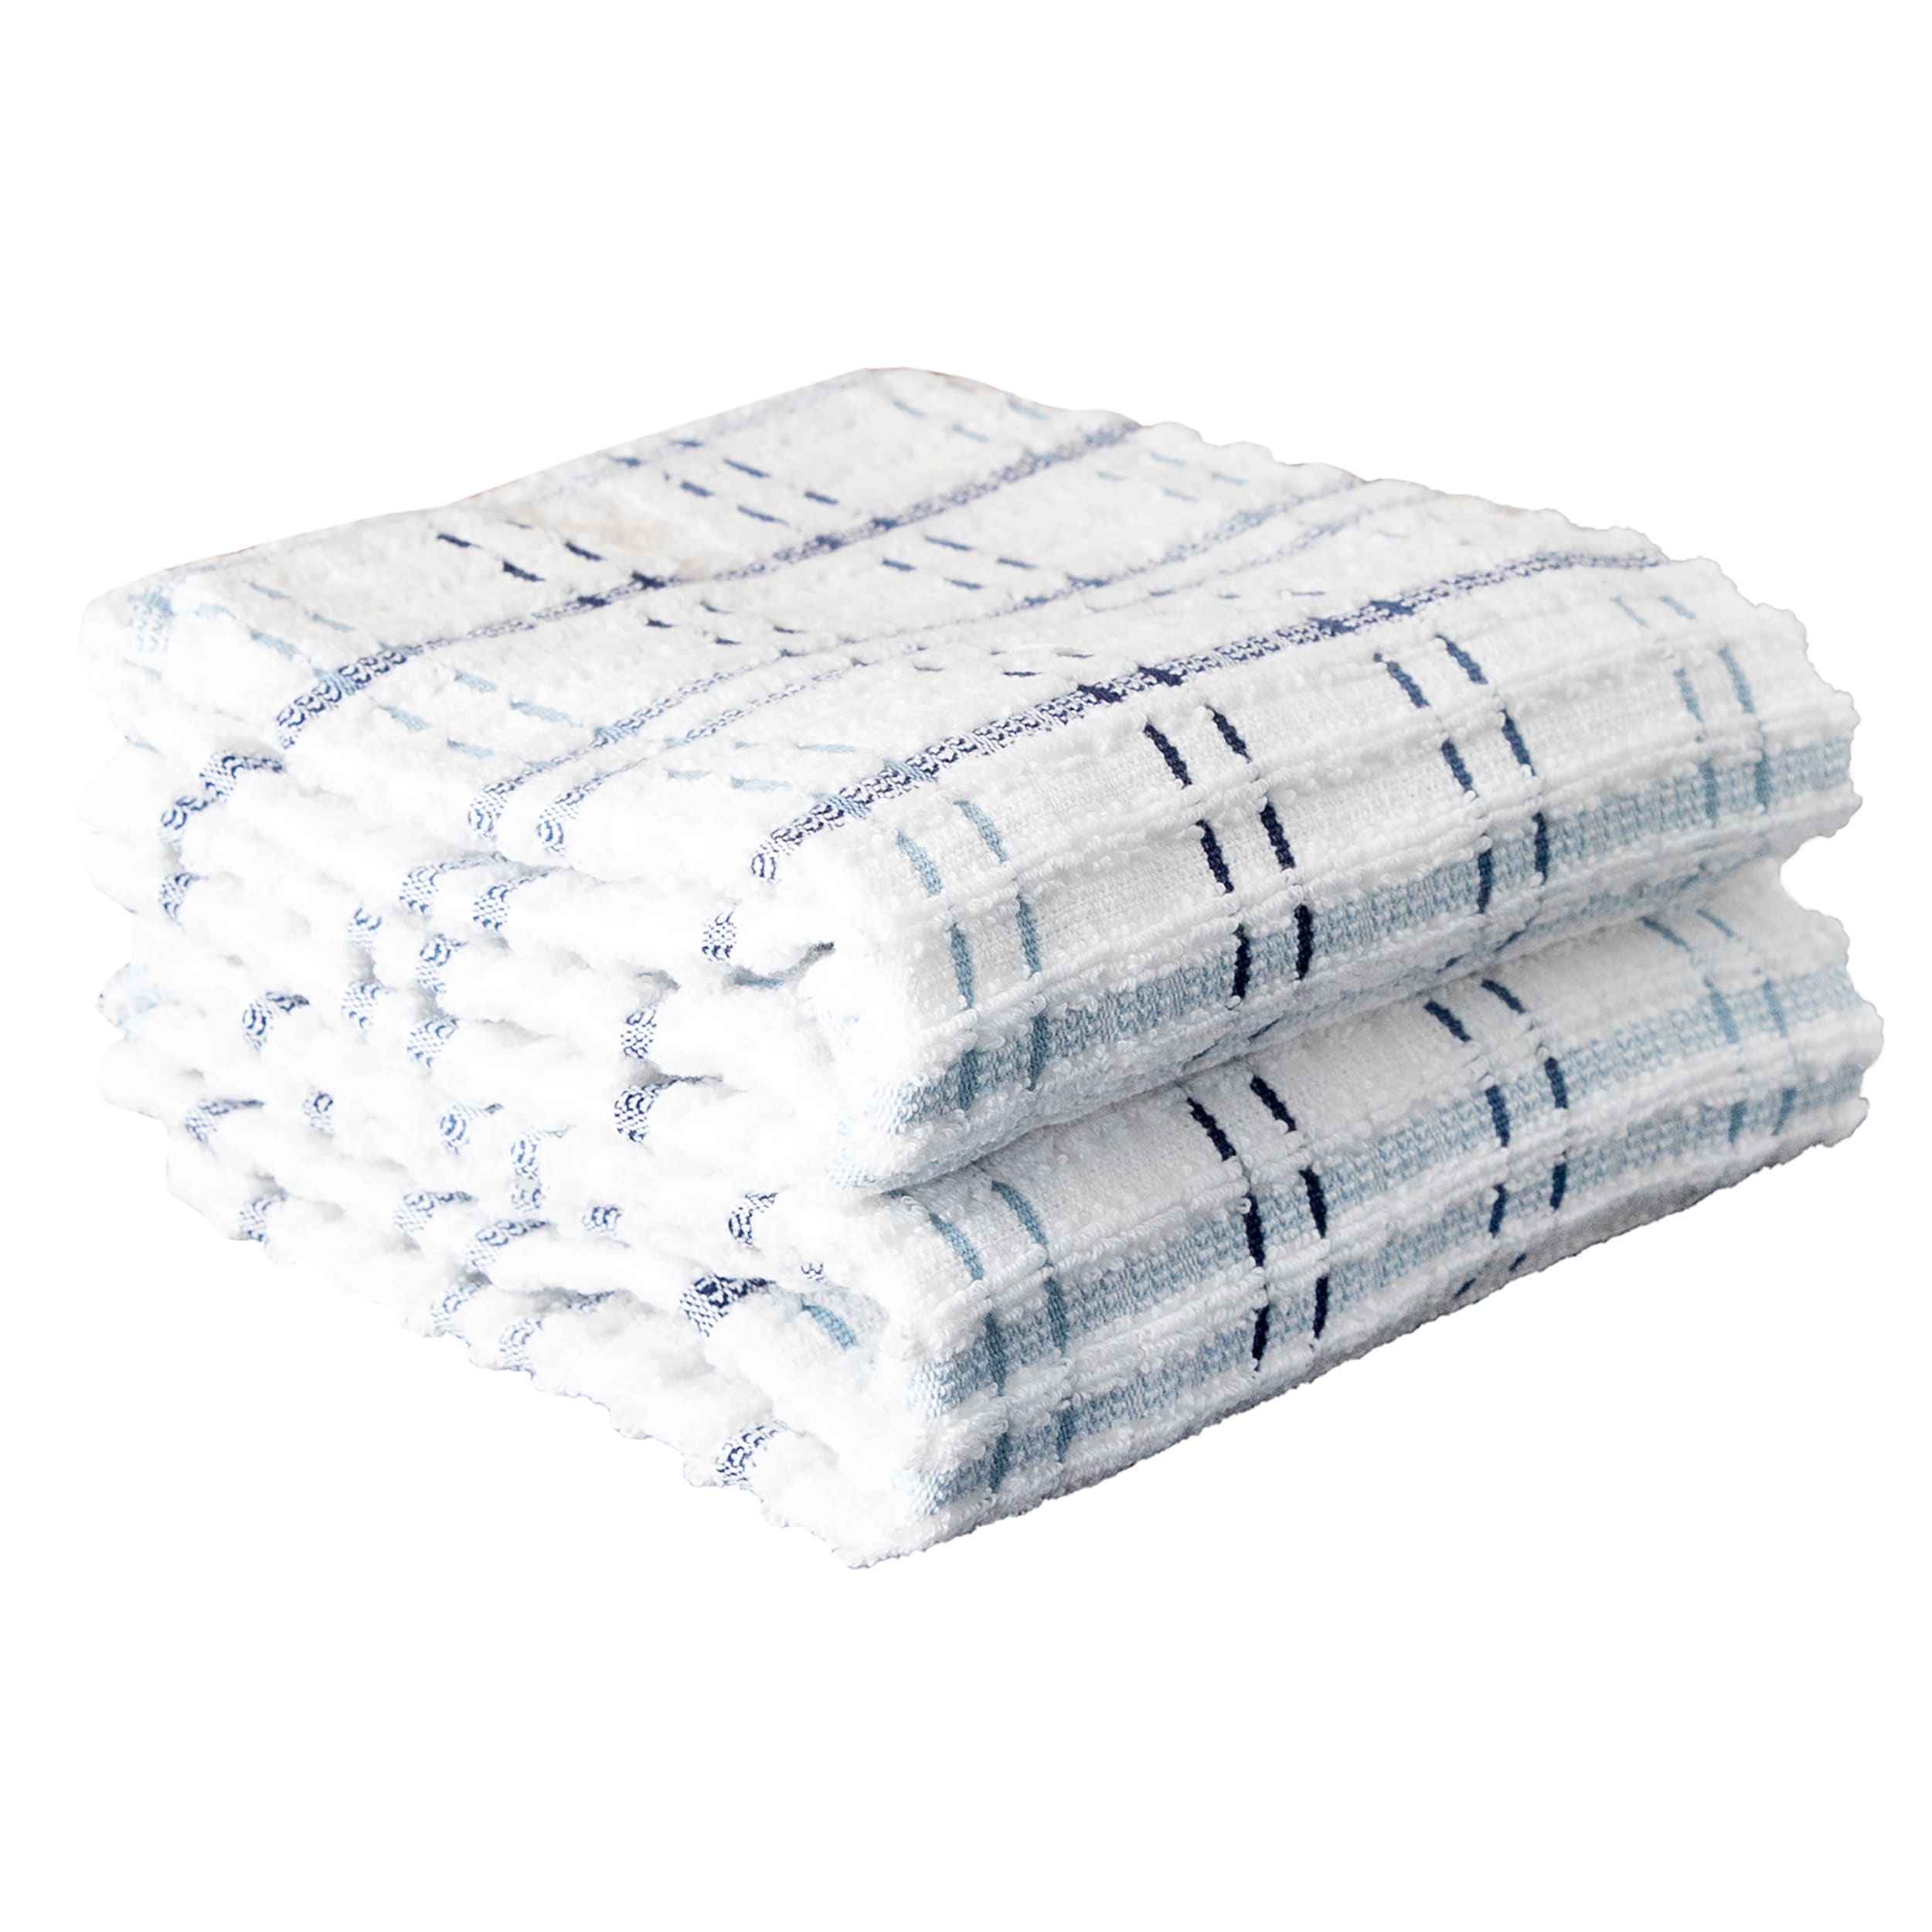 https://ak1.ostkcdn.com/images/products/is/images/direct/4eeda32112d9903cf7fef71ebc8980e9a77c8bde/Royale-Check-Federal-Blue-Cotton-Kitchen-Towels-%28Set-of-2%29.jpg